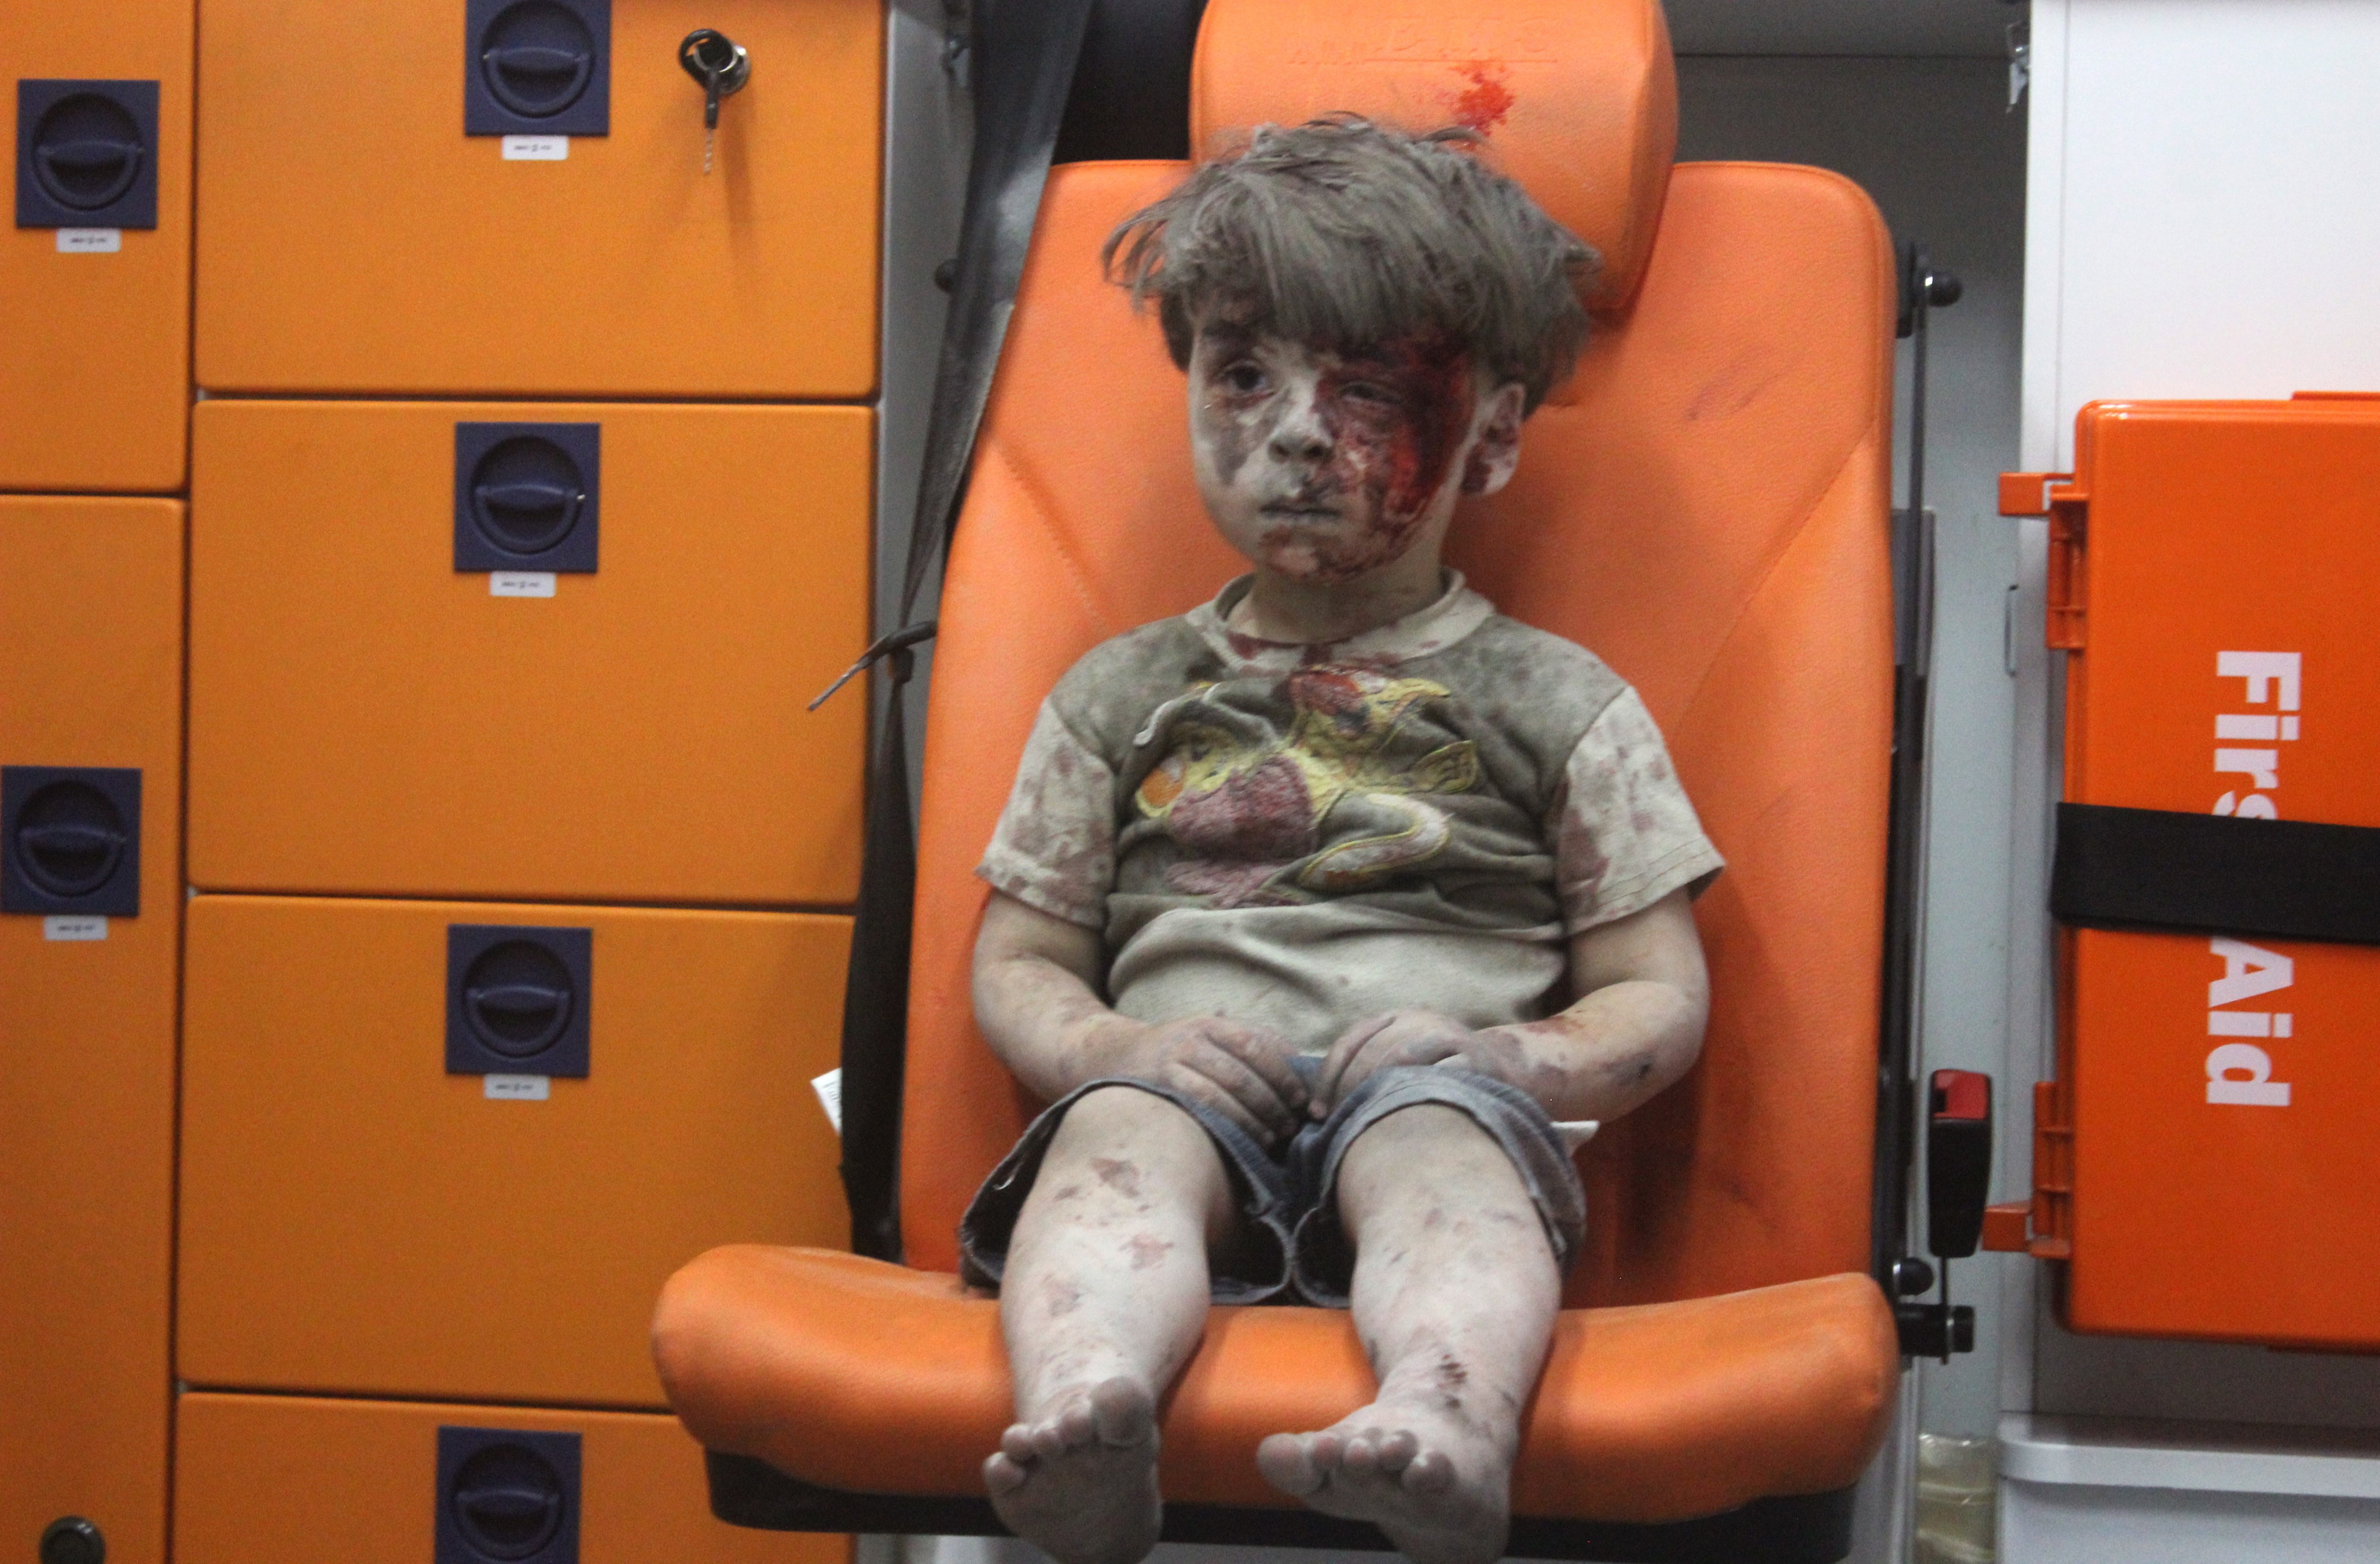 Five-year-old Syrian boy Omran Daqneesh sits alone in the back of the ambulance after he sustained injuries during an airstrike targeting the Qaterji neighborhood of Aleppo on Aug. 17, 2016. (Mahmoud Rslan—Anadolu Agency/Getty Images)